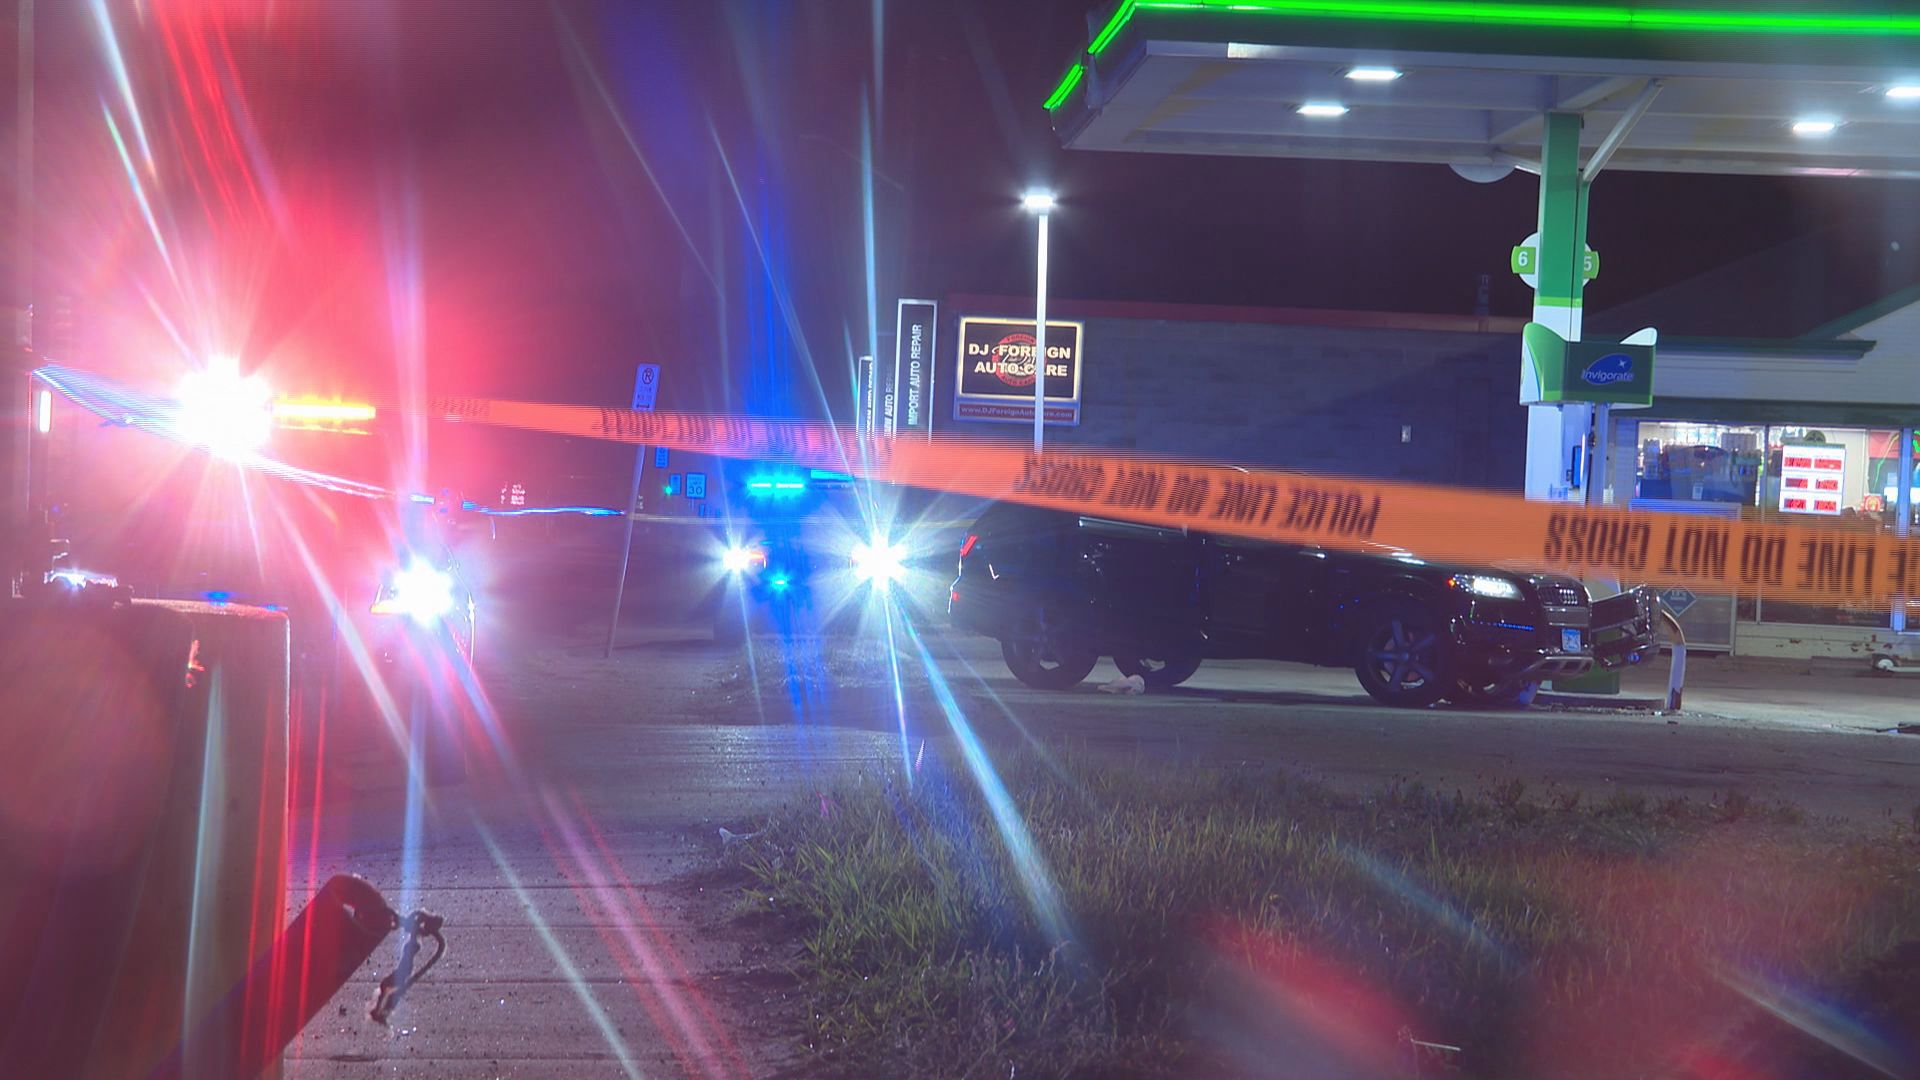 Police say a 14-year-old boy died at a hospital after he was shot multiple times while sitting in an SUV at a gas station on University Ave.